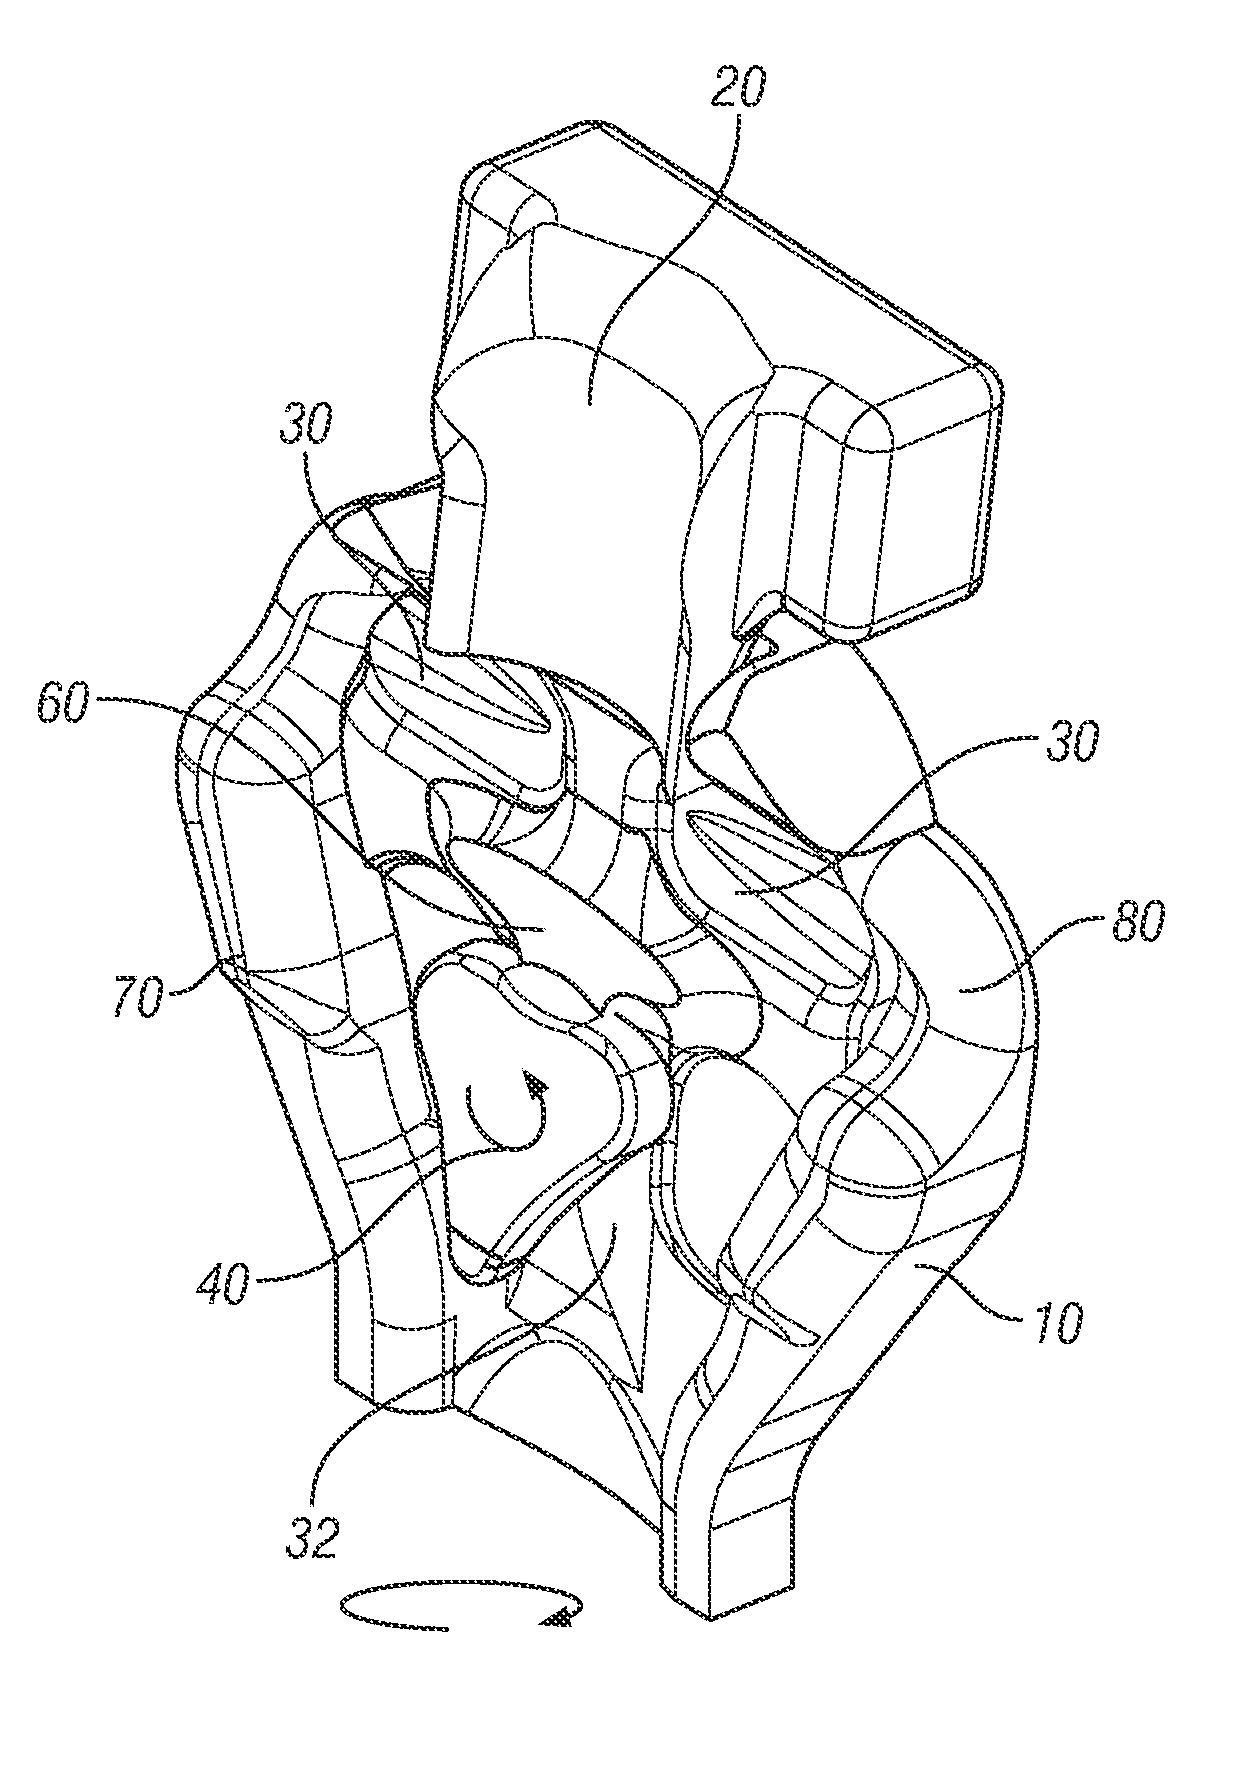 Apparatus and method for facilitating or enhancing a person's breathing